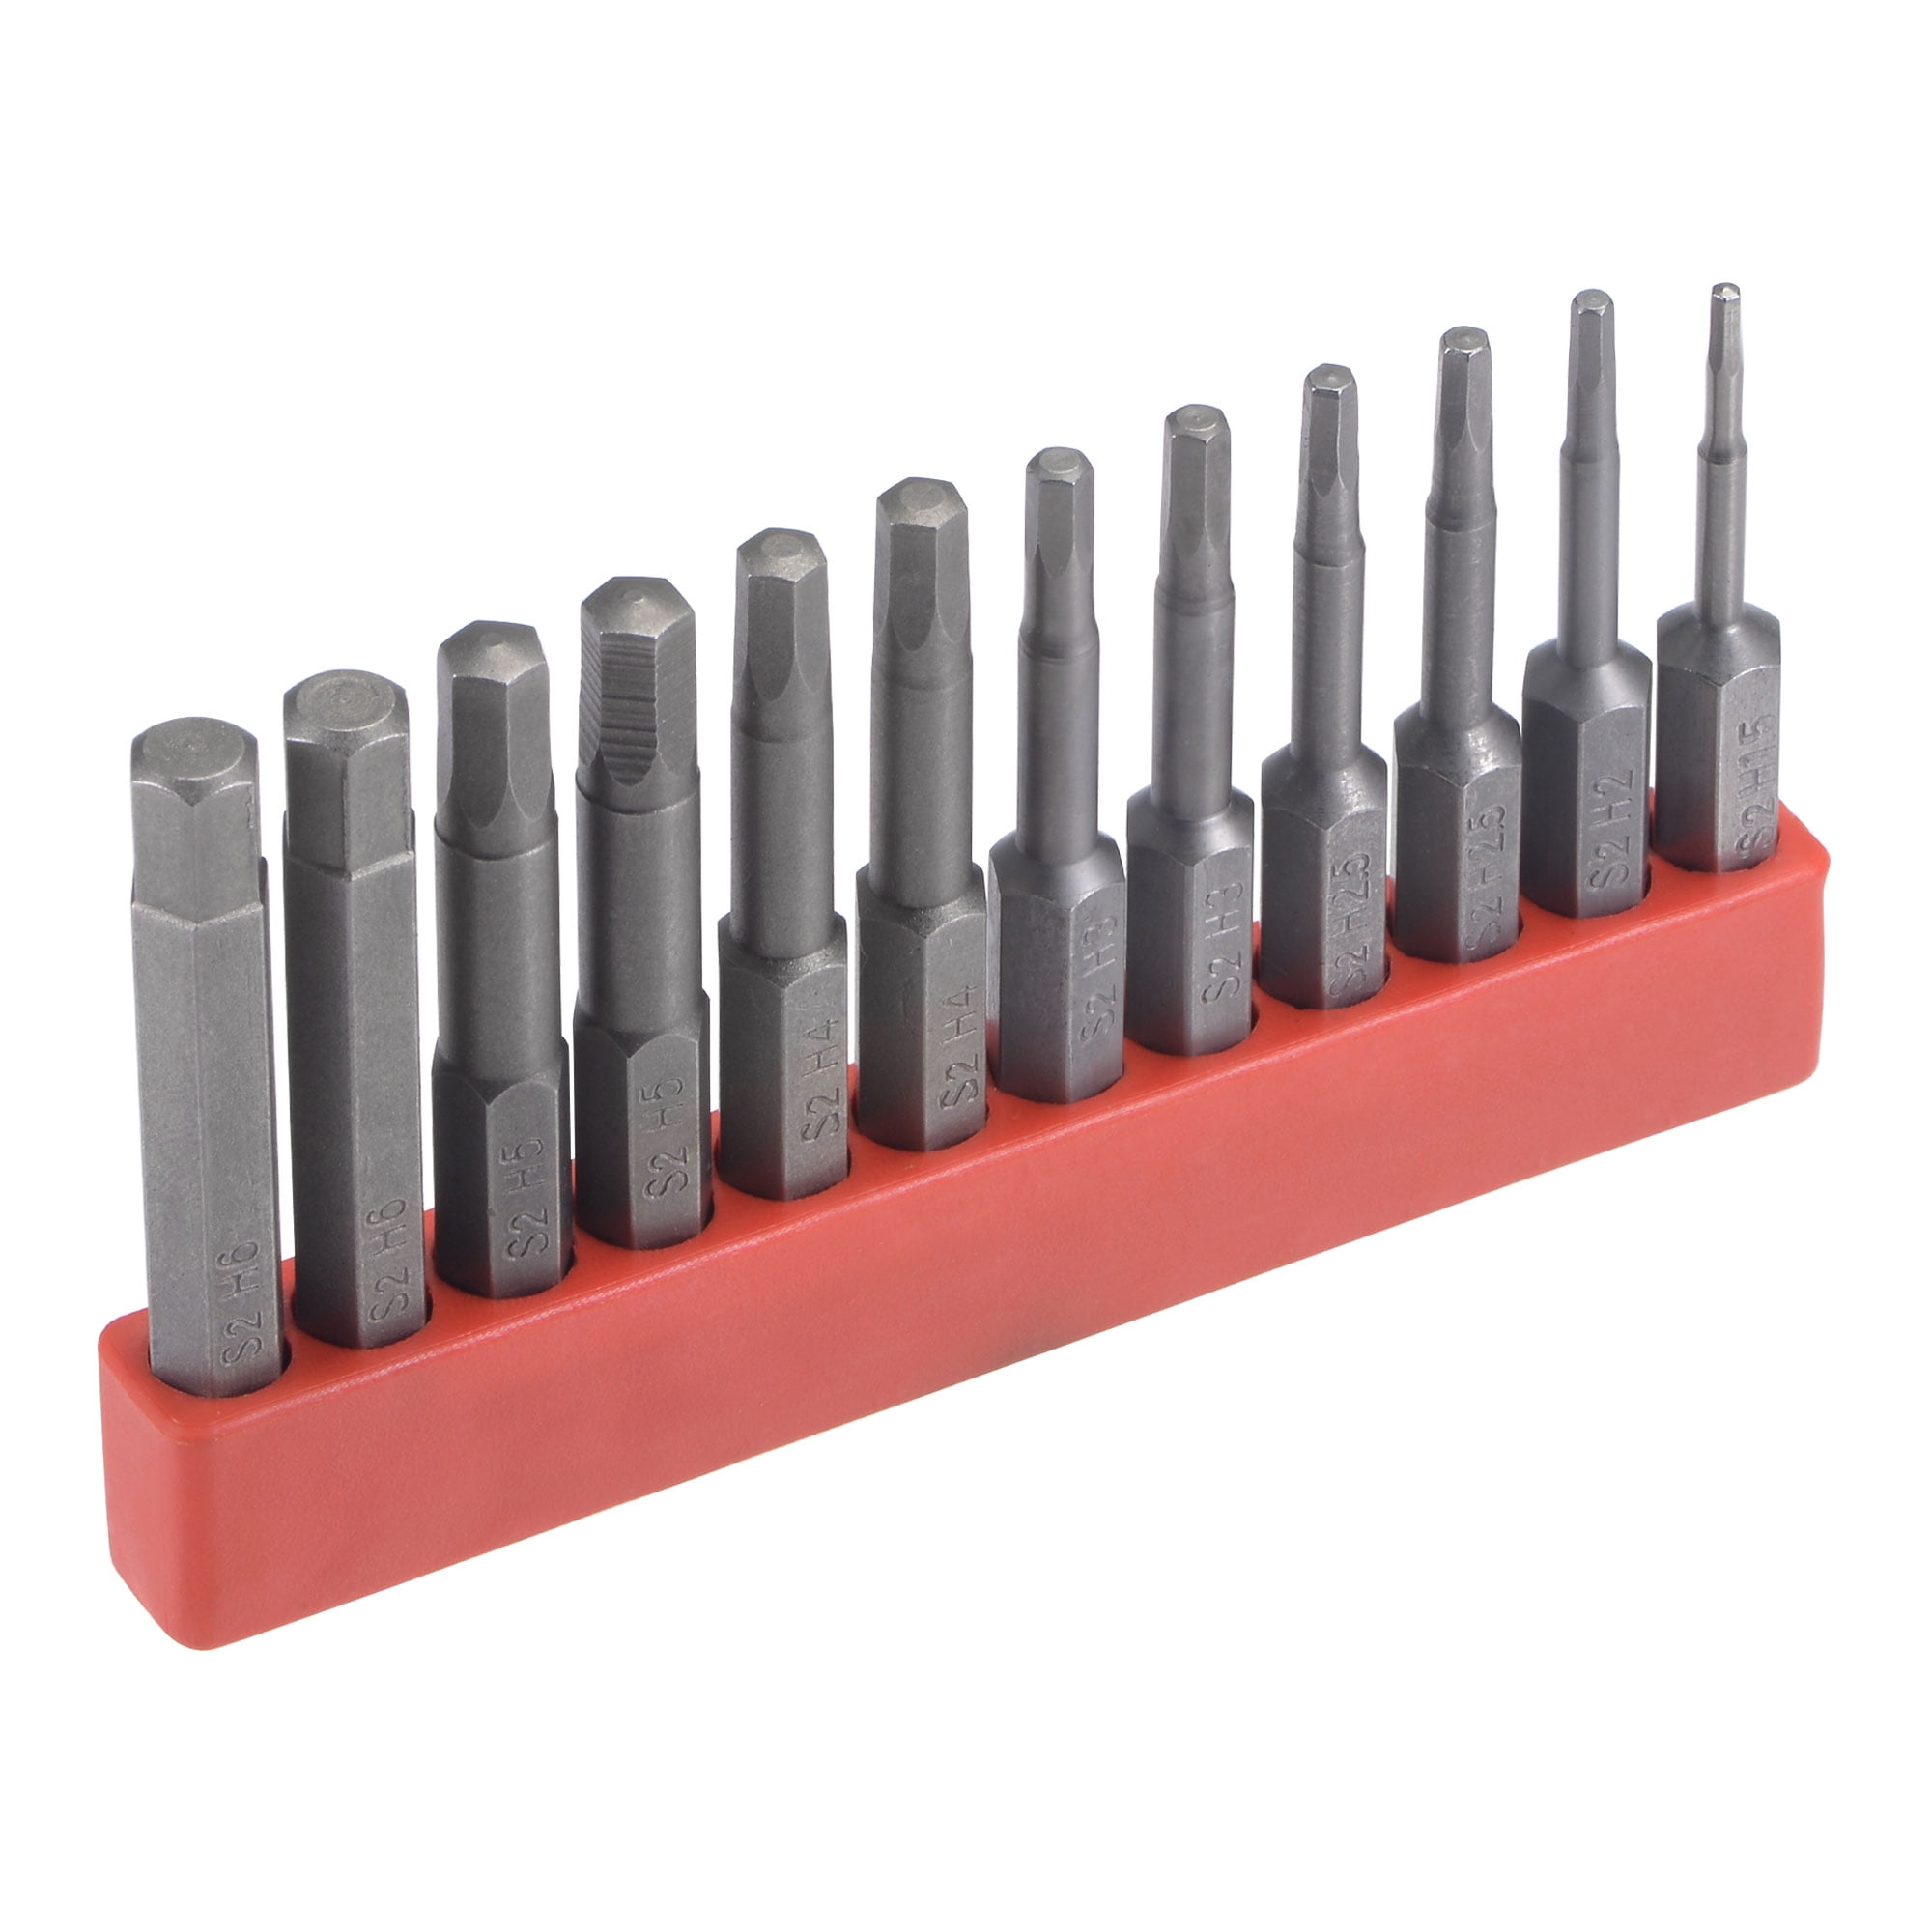 uxcell 10Pcs 1/4 Hex Shank 50mm Length Magnetic Hex Head H1.5 Screwdriver Bits S2 Alloy Steel 